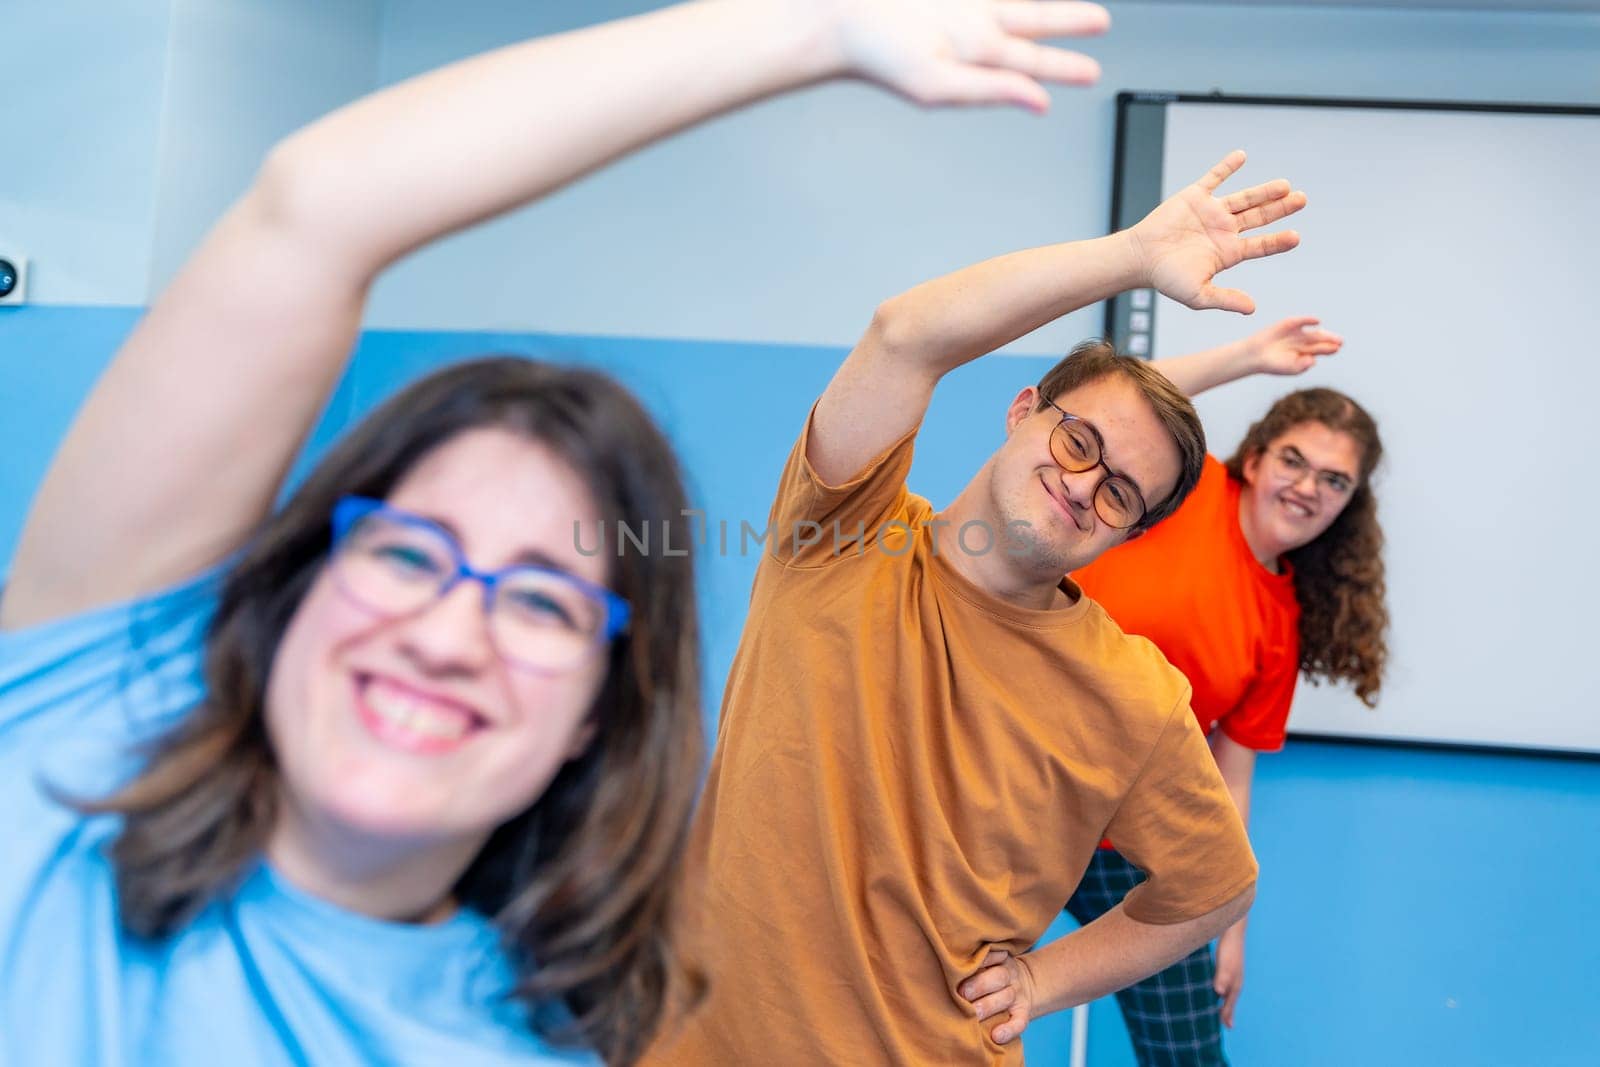 Man with down syndrome and friends enjoying gym class by Huizi